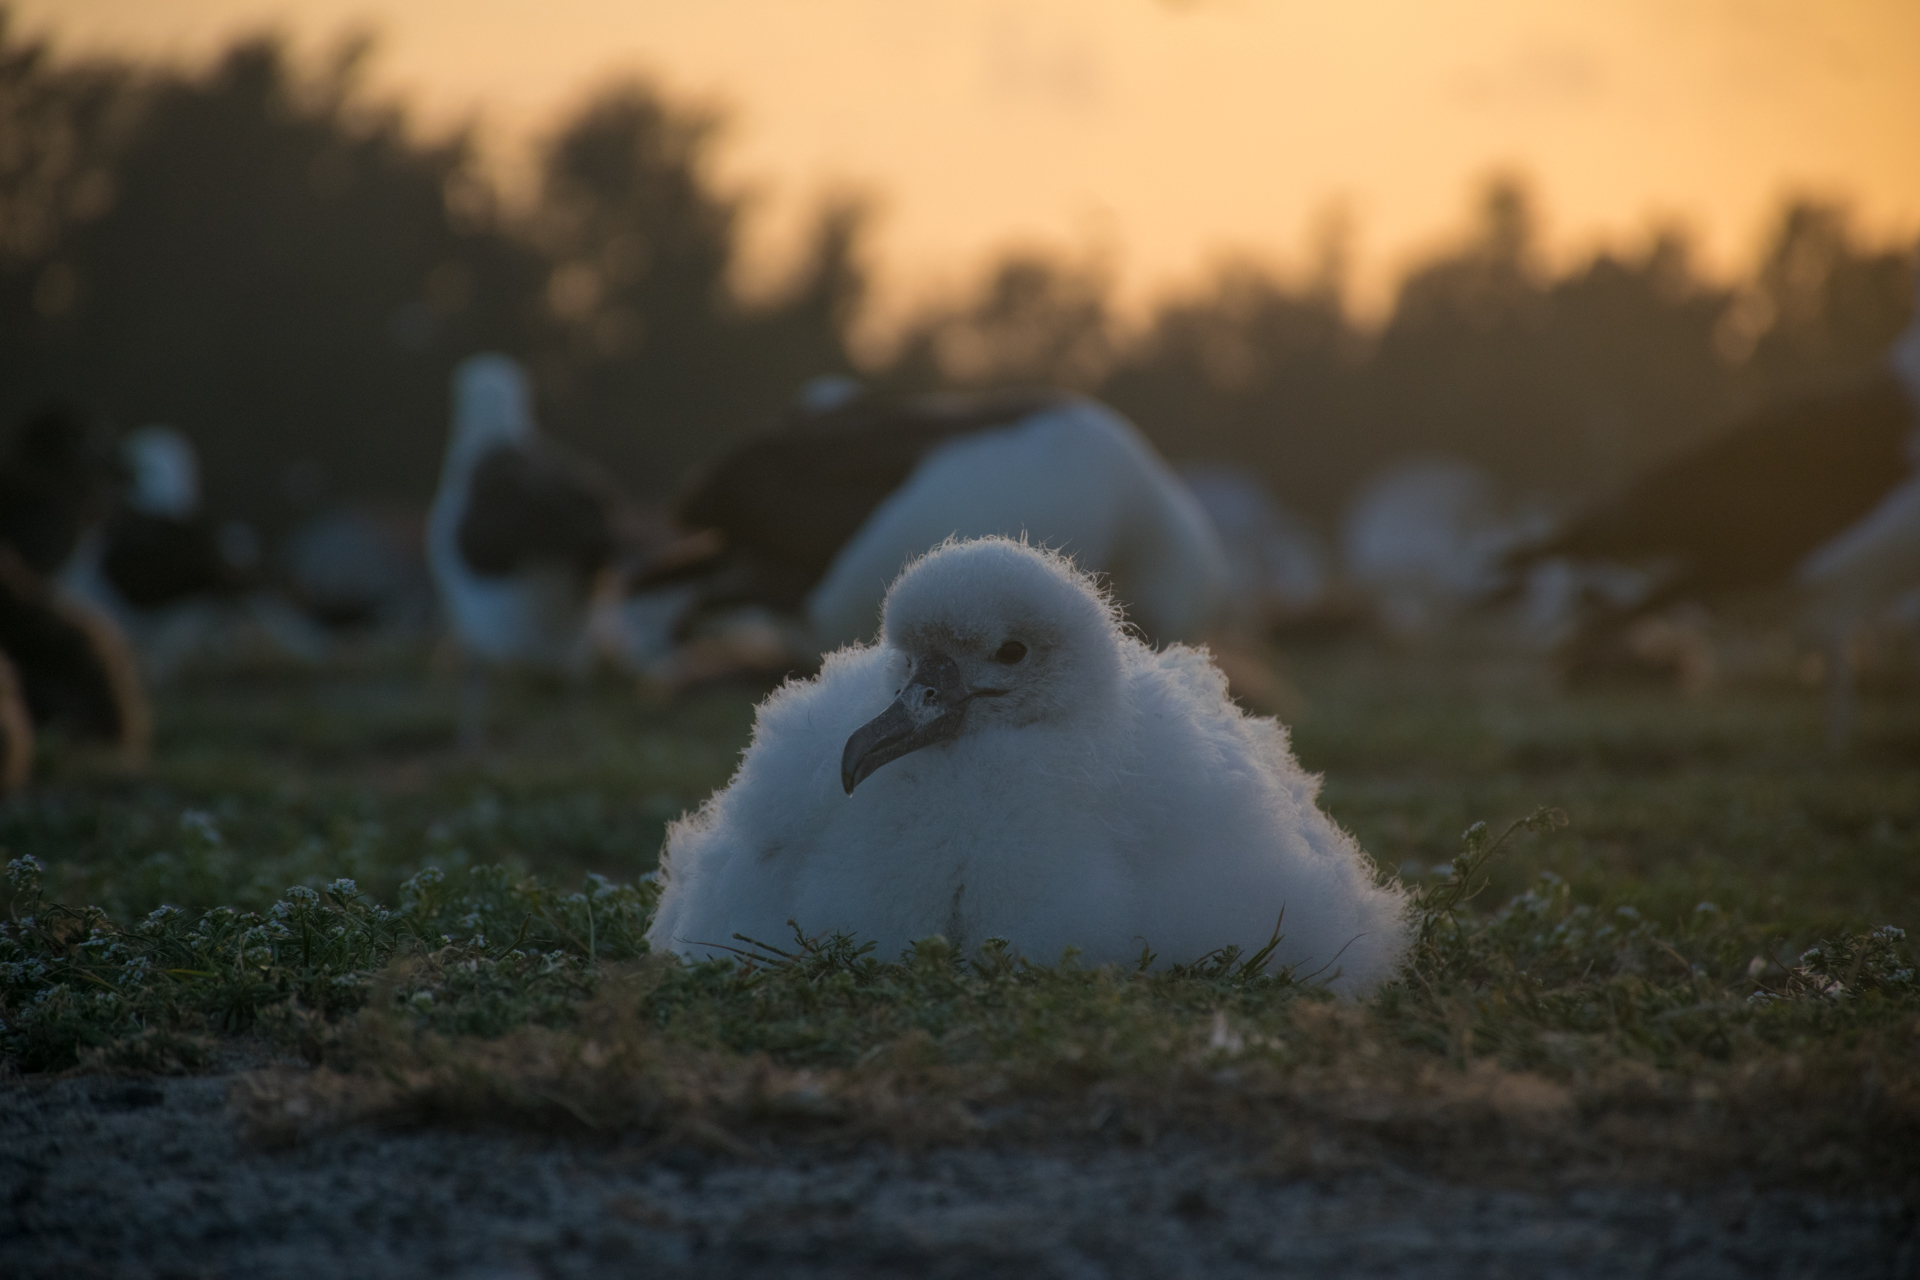 Midway, Atoll, Island, Albatross, Chick, Albino, Sunset, Magic, Golden, Hour, Photography, Northwestern, Hawaiian, one in a million, rare, exotic, bird, animal, one of a kind